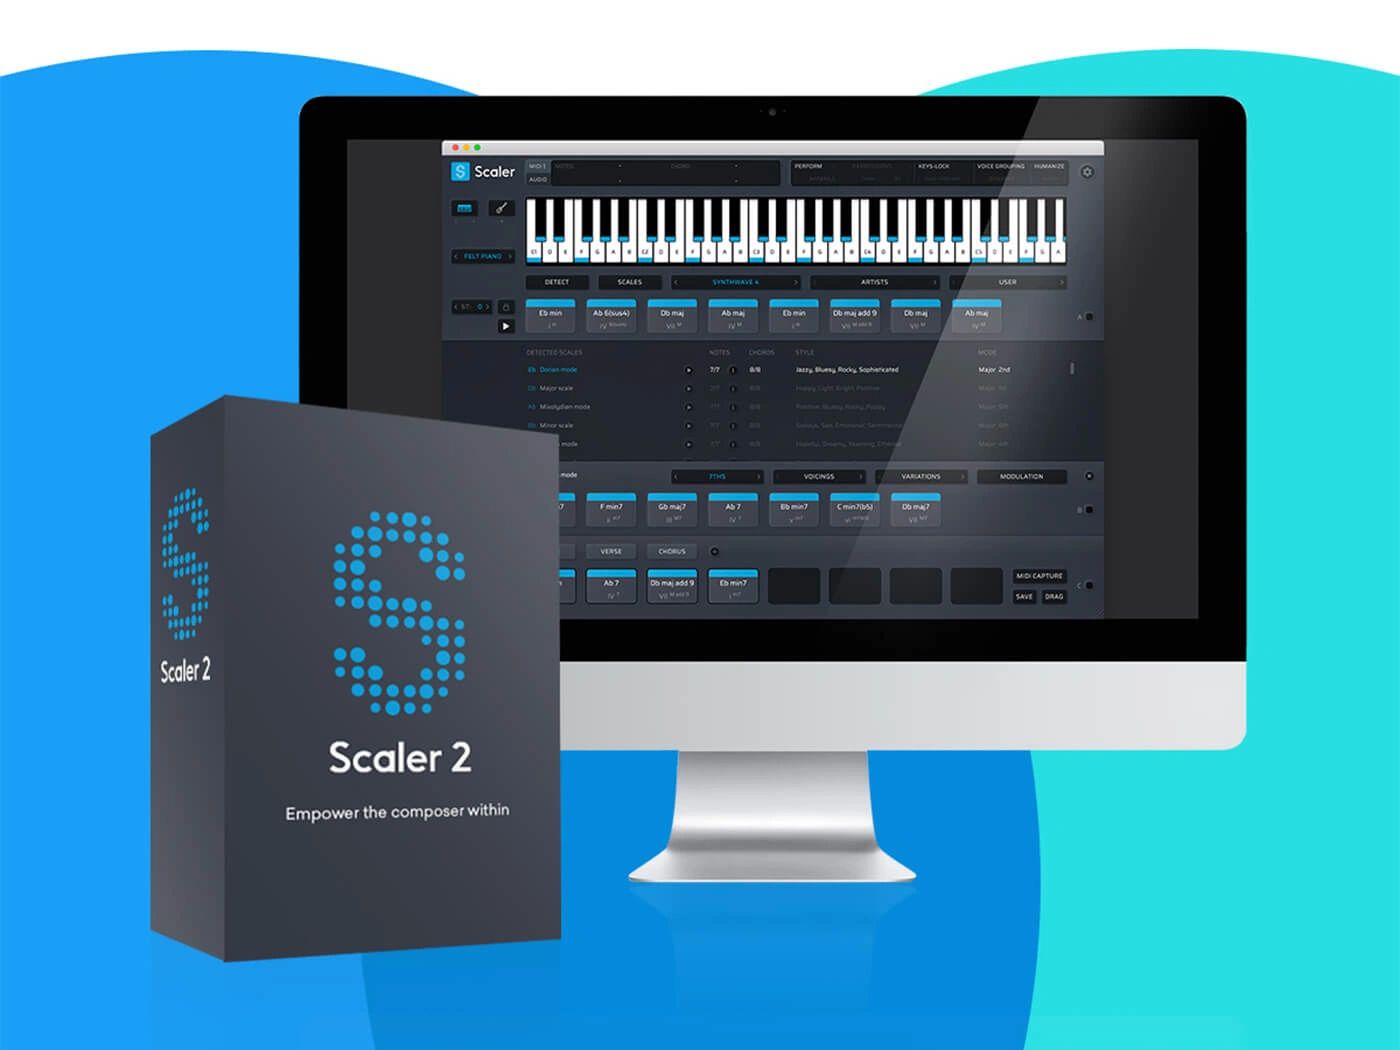 Plugin Boutique Scaler 2.8.1 download the new version for iphone